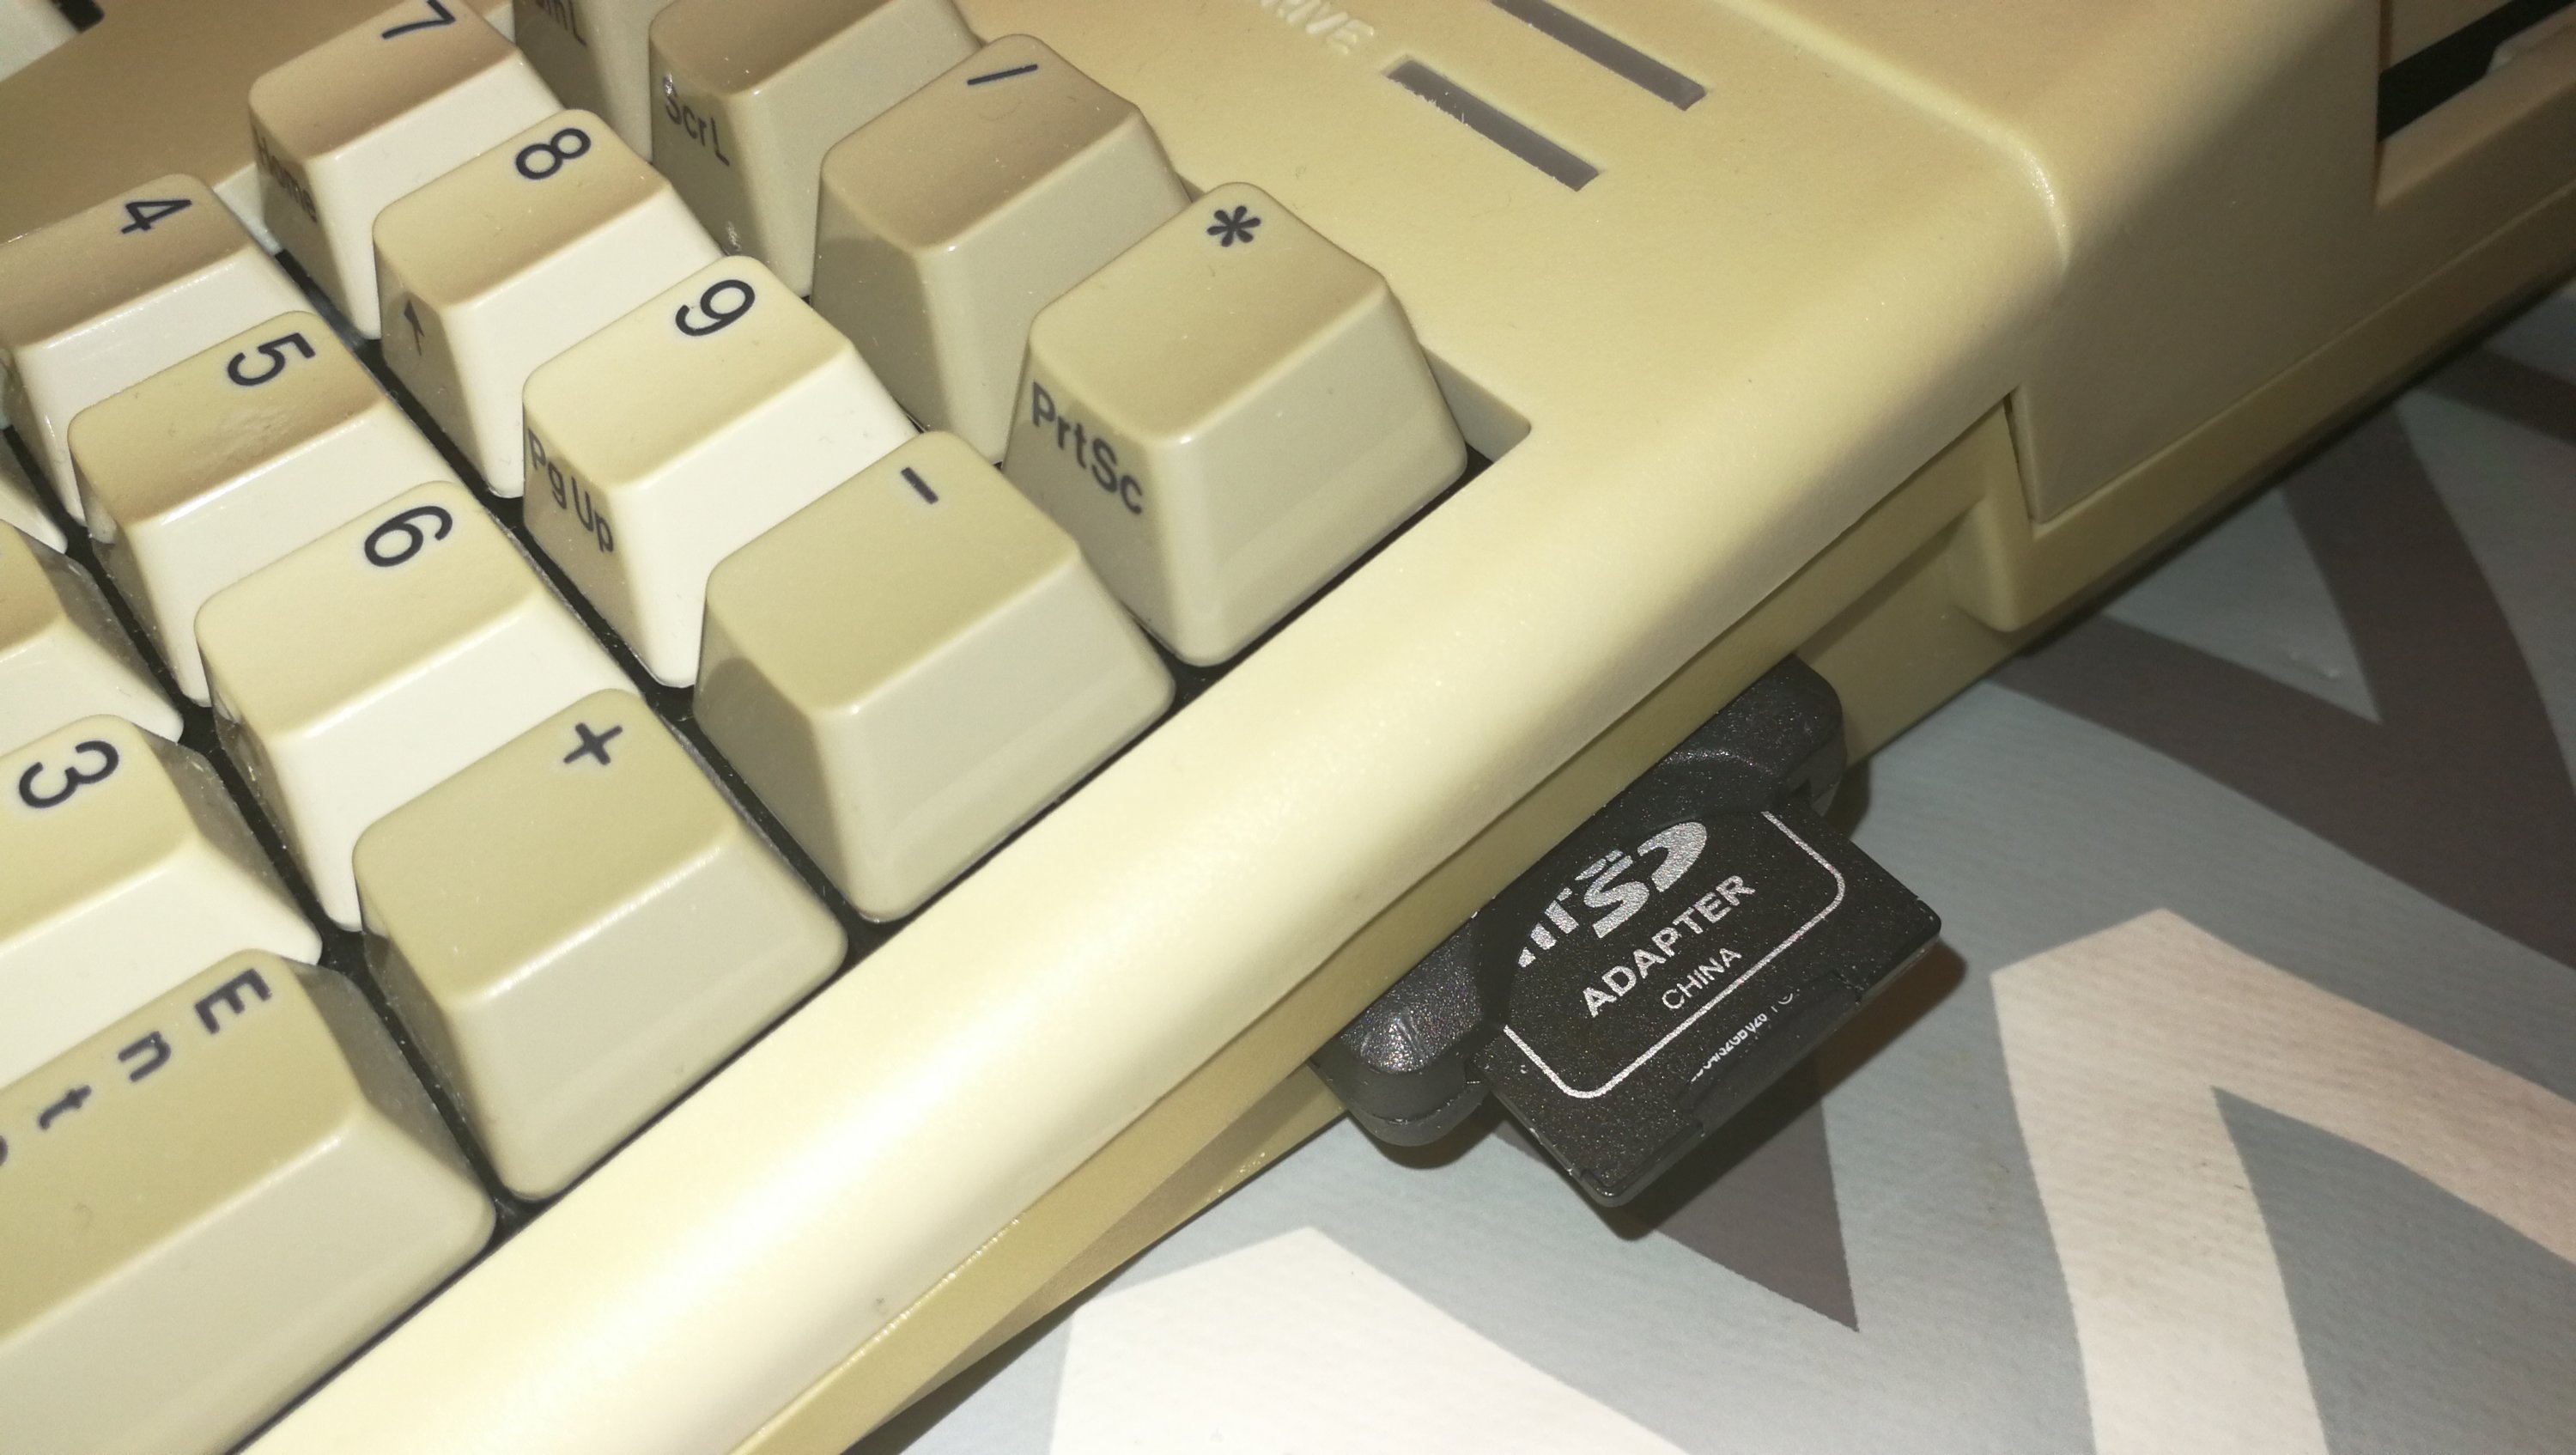 SD Card Slot and HDMI port to an Amiga 500